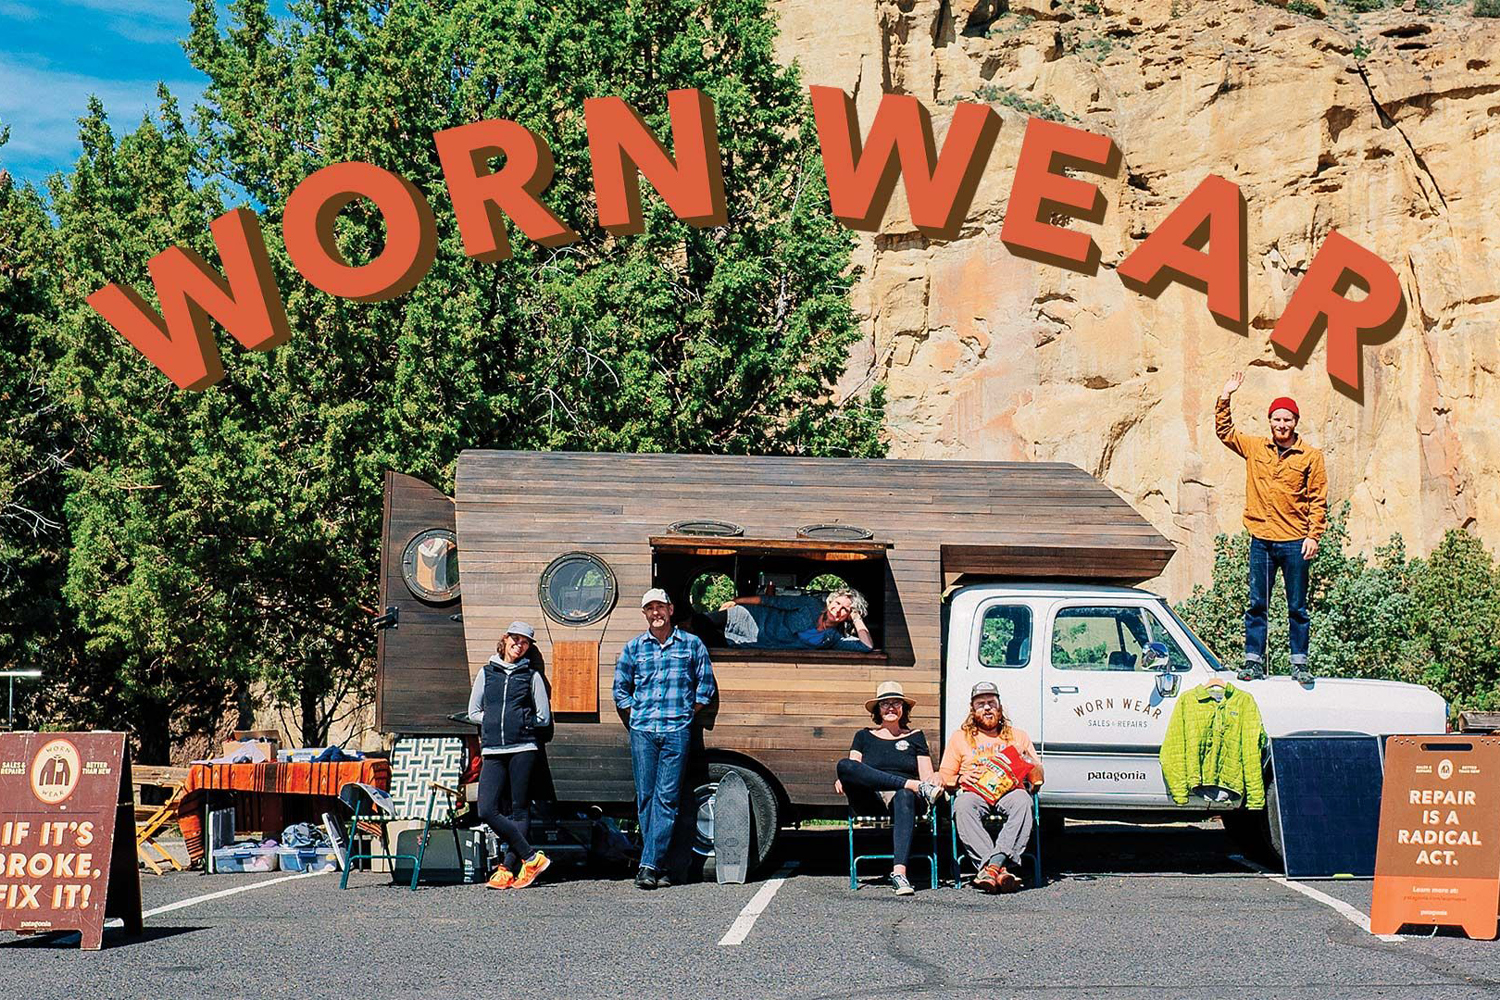 The Patagonia Worn Wear program is a great way to resell, repair and purchase used outdoor gear in 2022